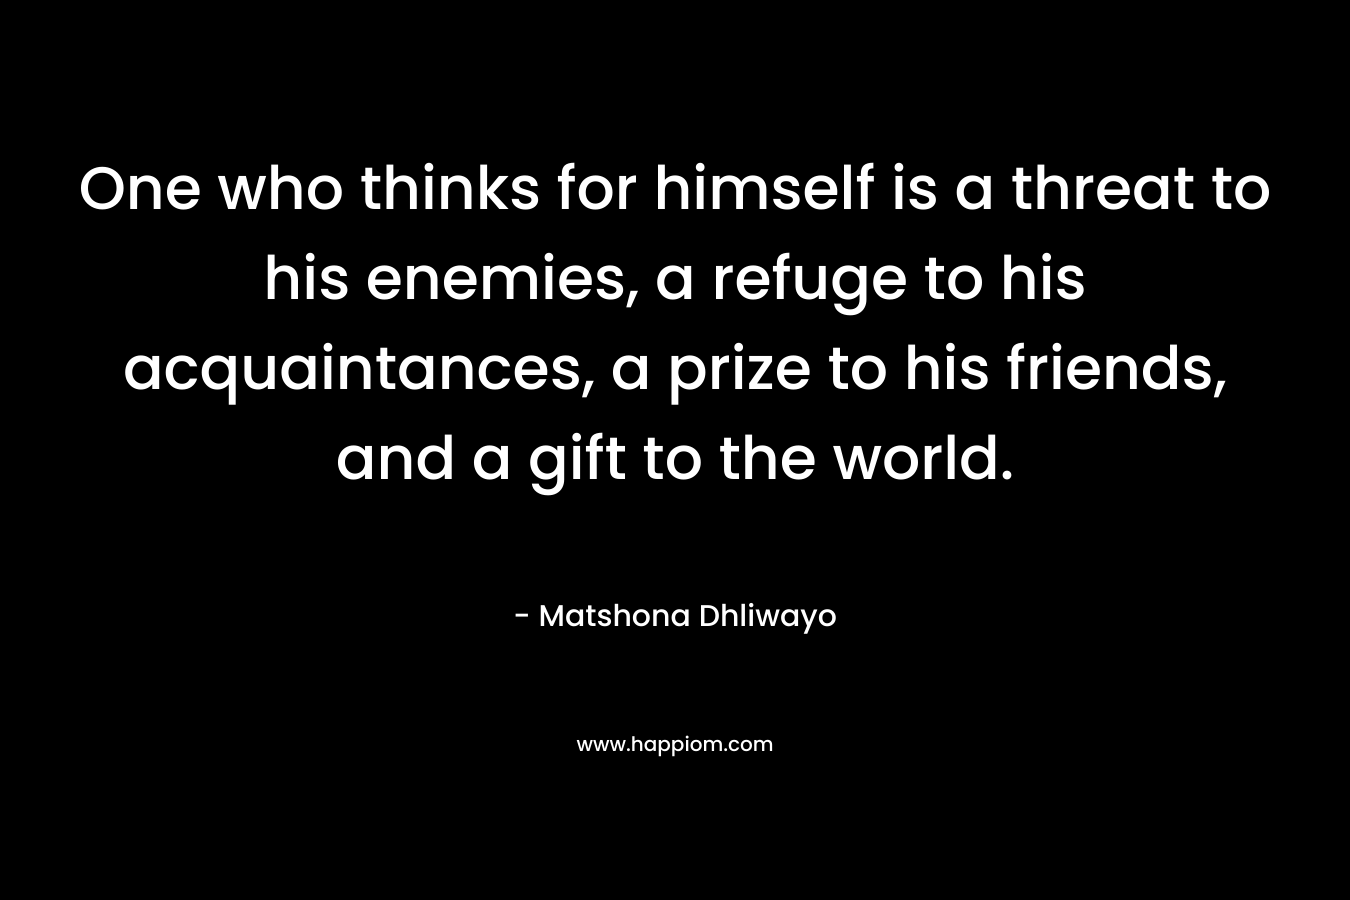 One who thinks for himself is a threat to his enemies, a refuge to his acquaintances, a prize to his friends, and a gift to the world.